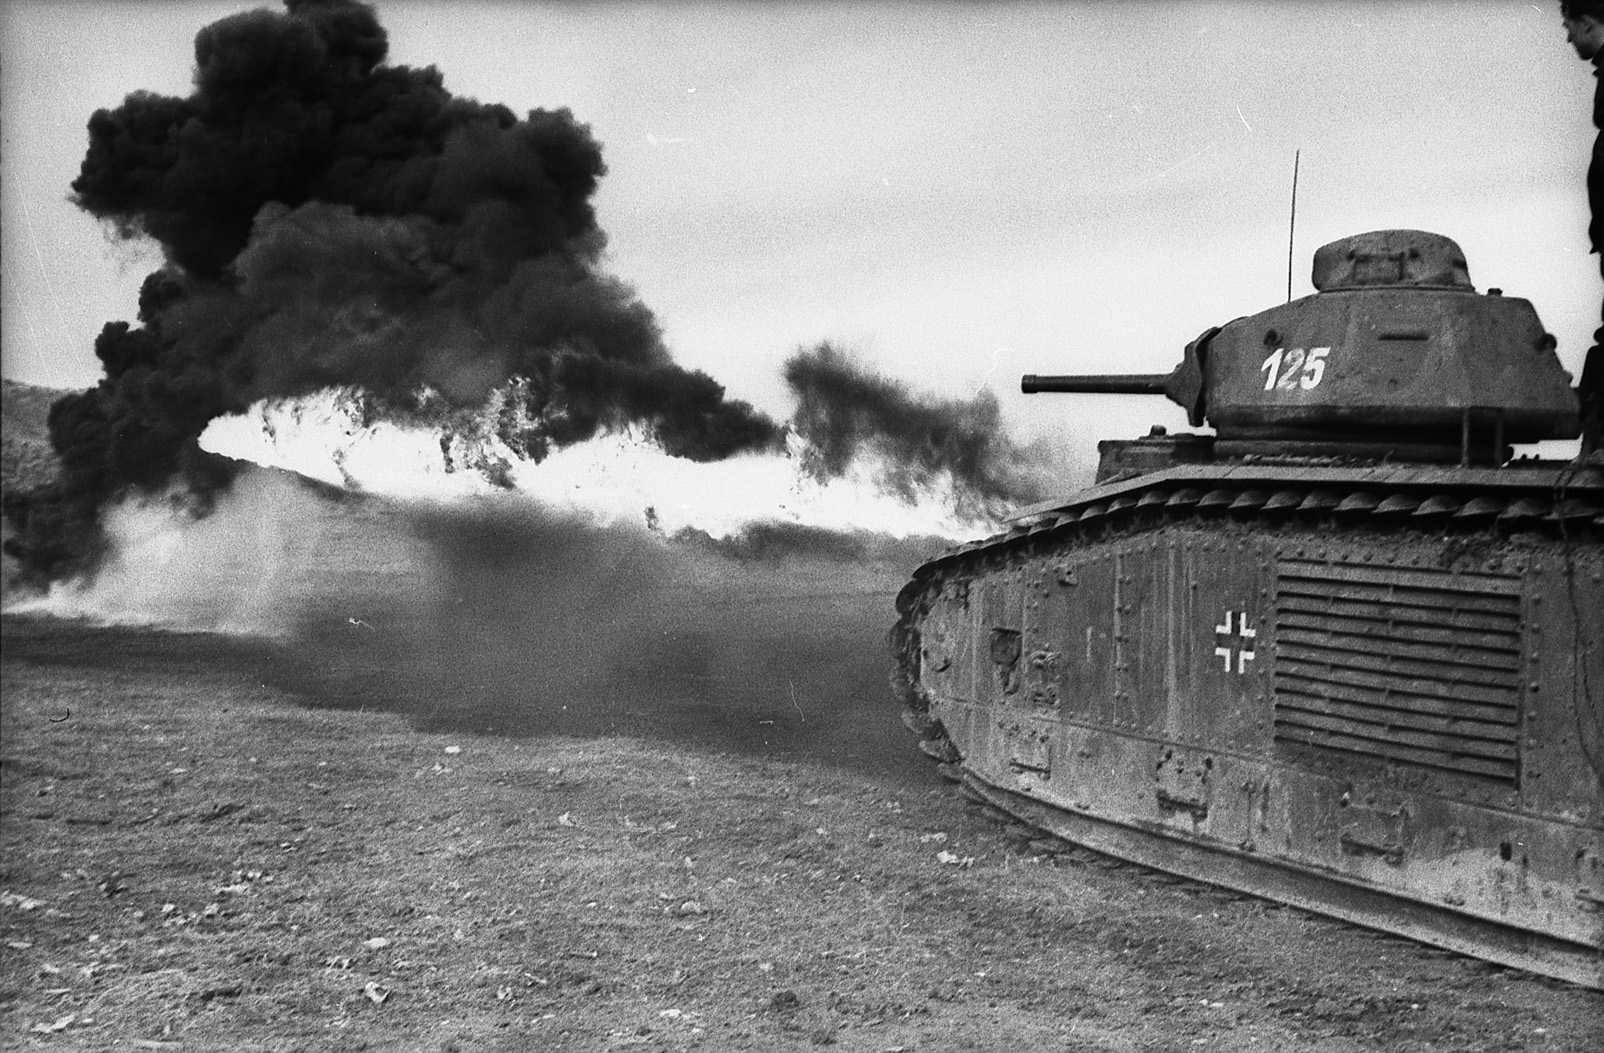 During their successful campaign against France in the spring of 1940, the Germans captured large numbers of French tanks and pressed them into service with the Wehrmacht. Here, a French-made Char B1, converted to a flammpanzer or flamethrower tank, is seen in action in southern Ukraine.